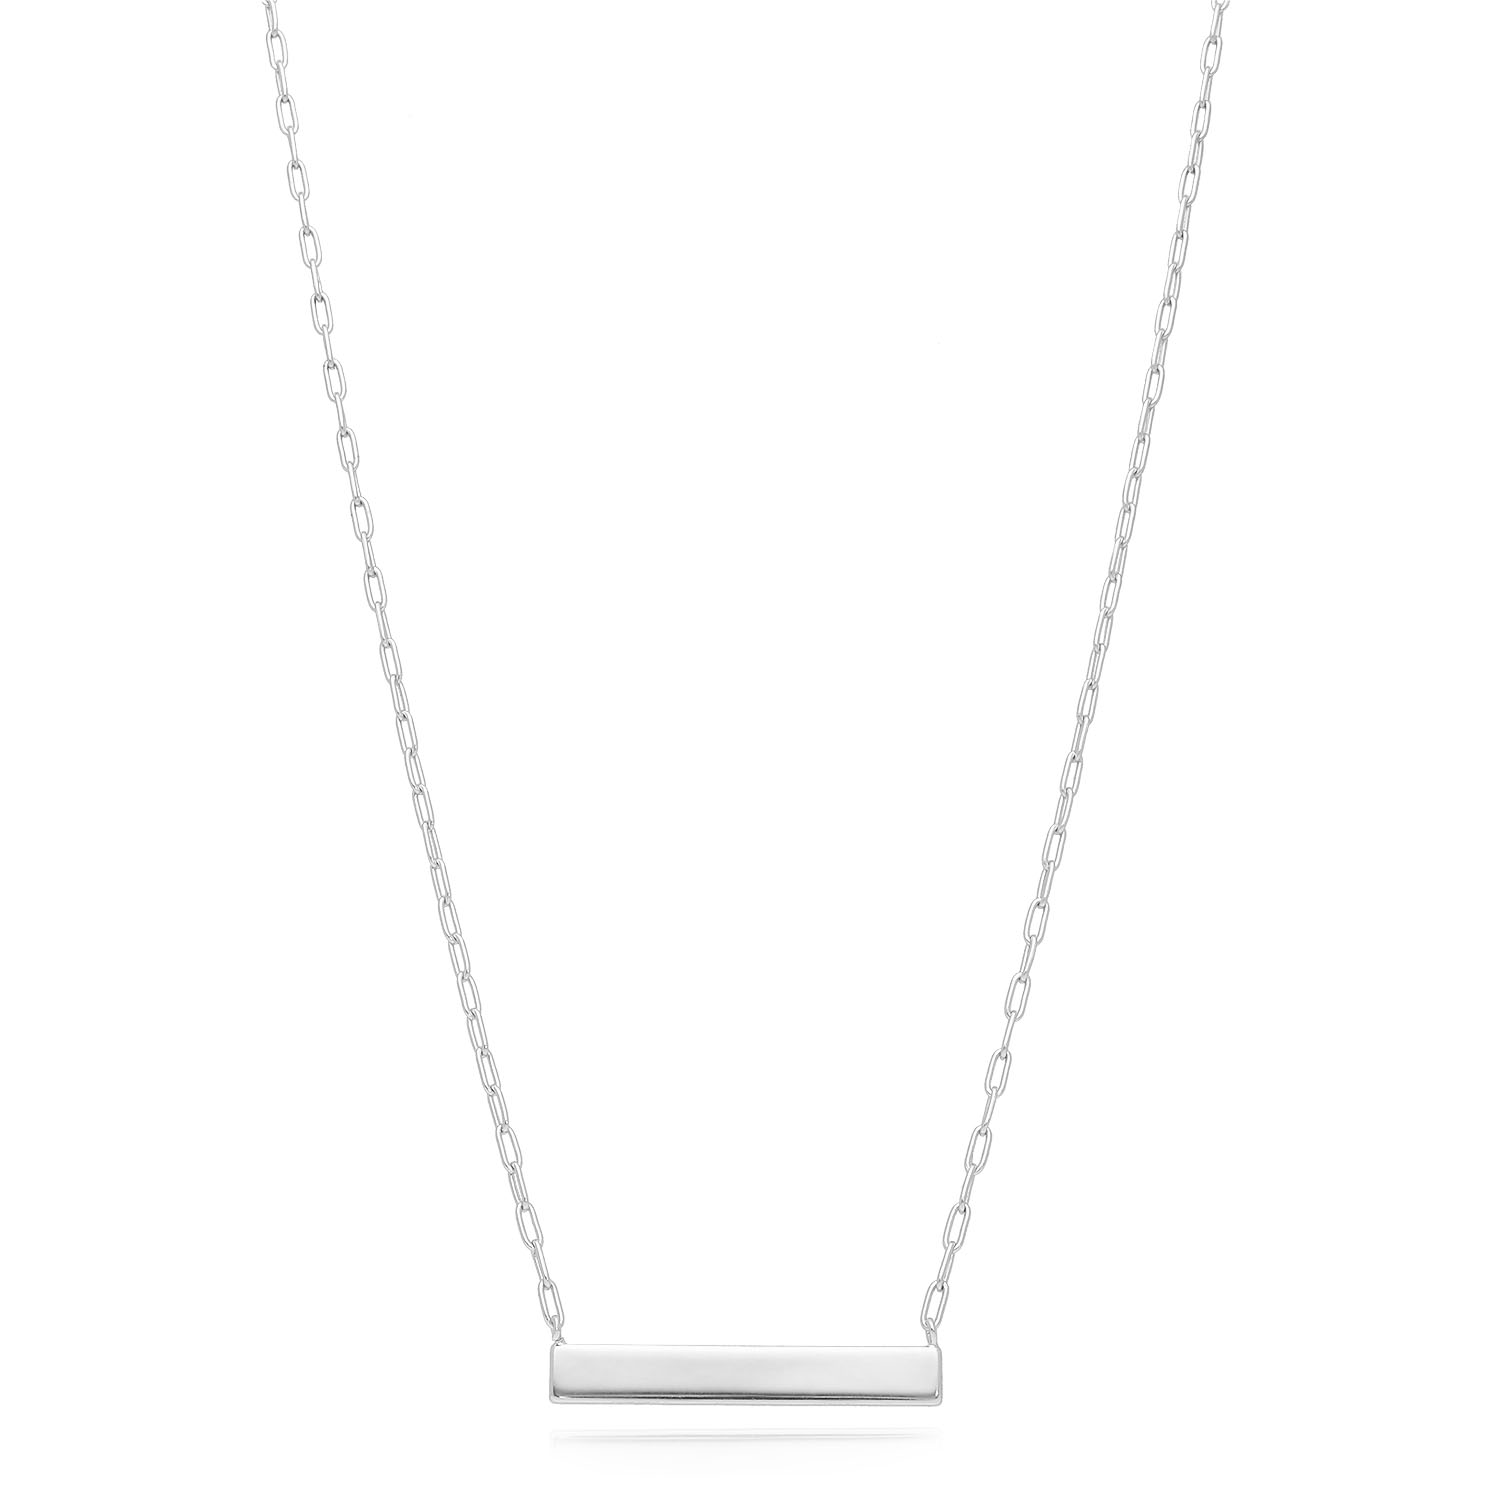 Engravable Gold Over Silver Paperclip Personalized Bar Pendant Necklace 16"-18" - White Gold Plated